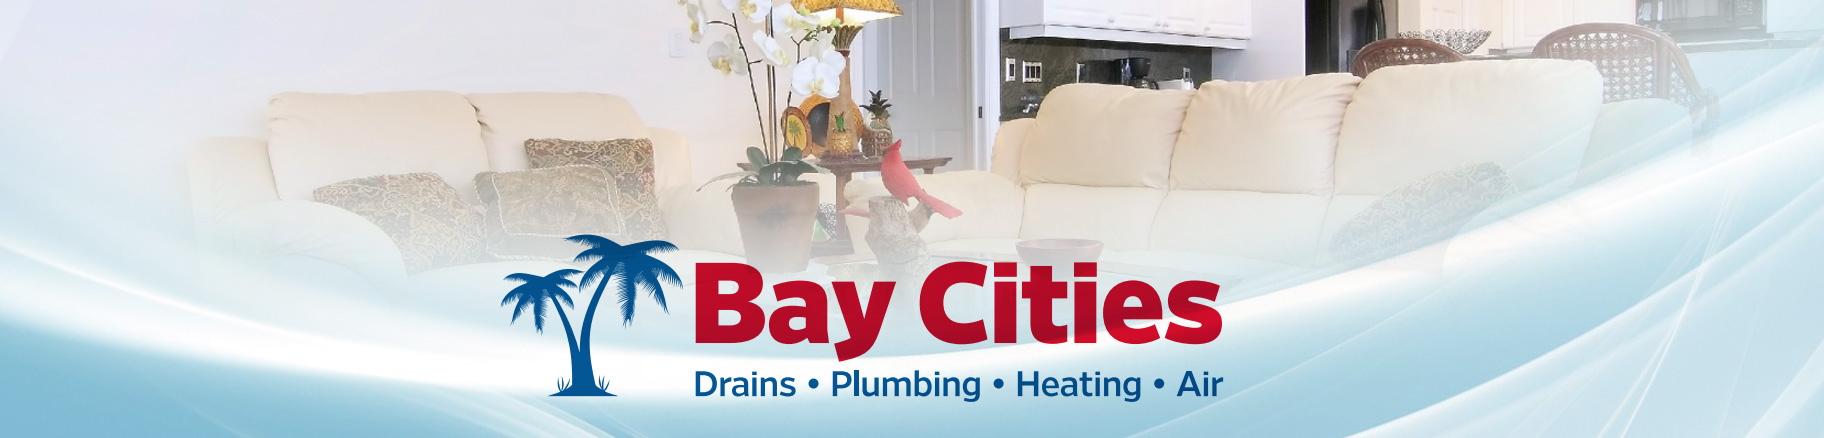 Bay Cities Furnace & Air Conditioning